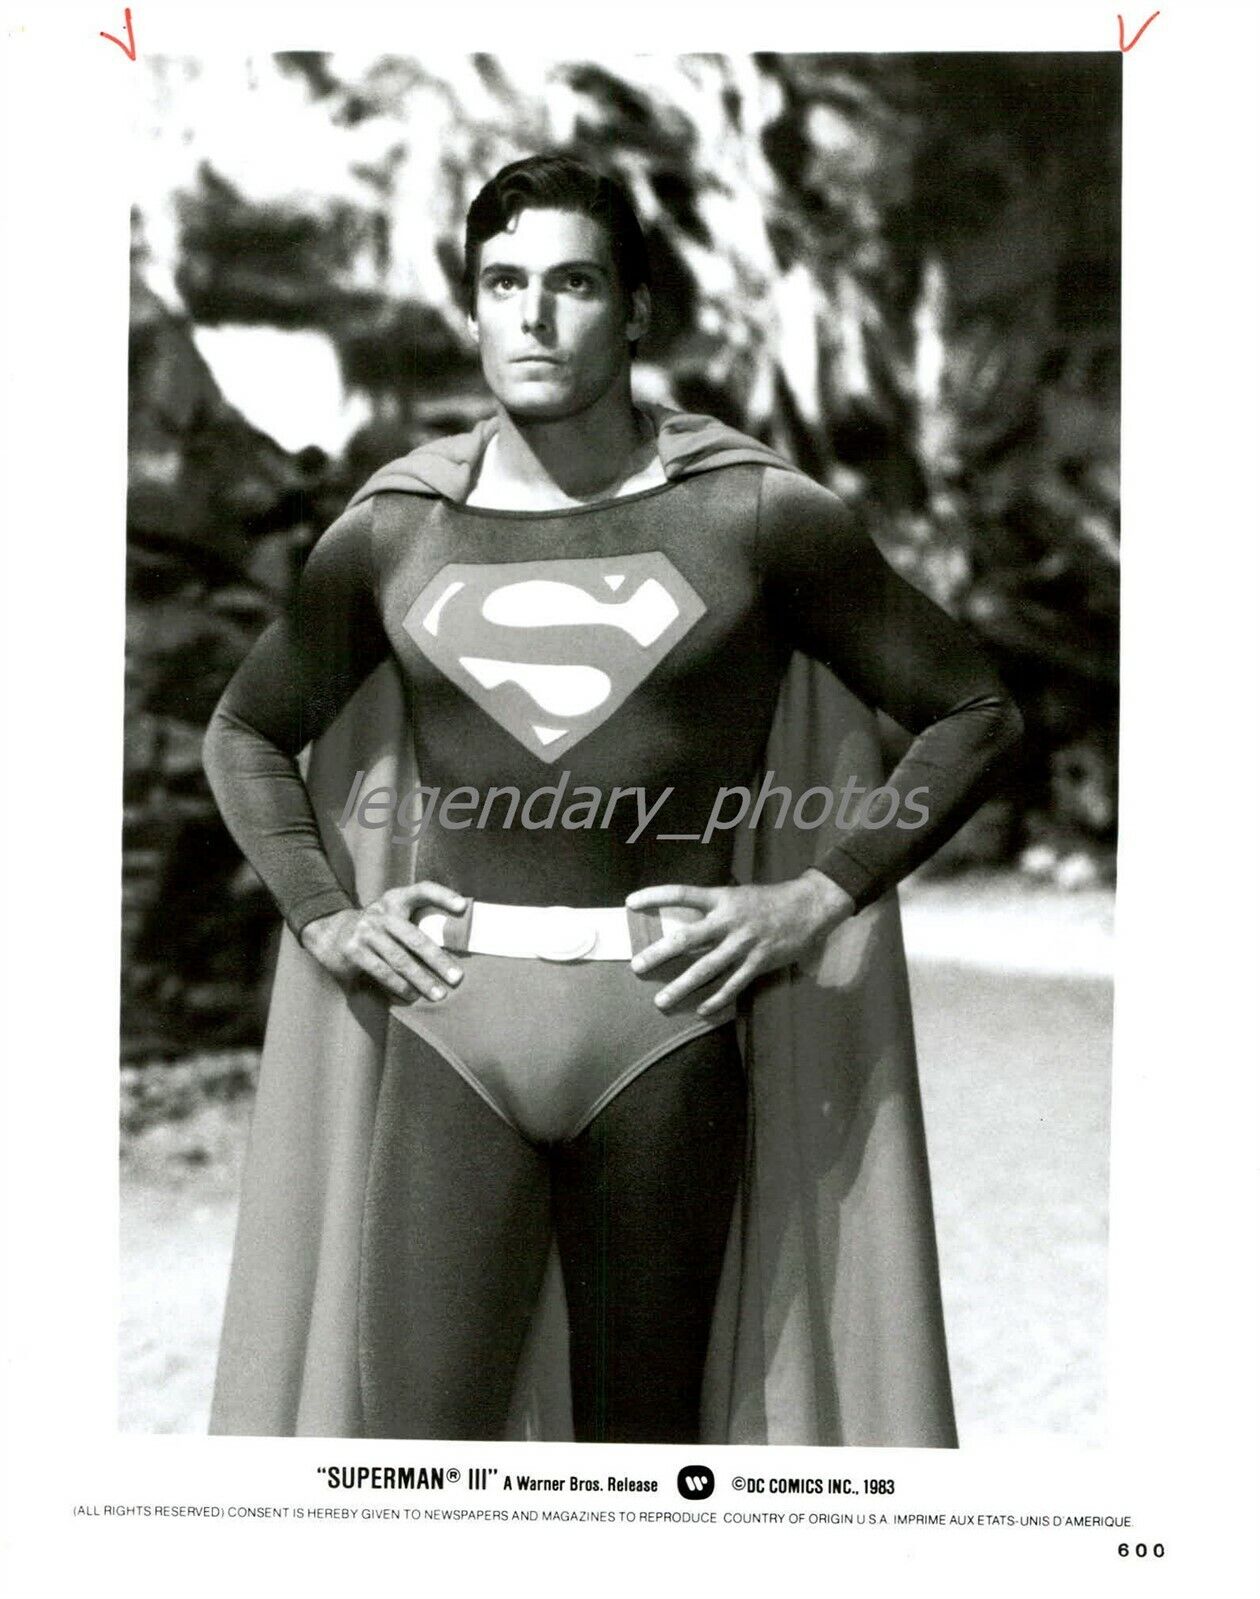 1983 Actor Christopher Reeves as Superman Original News Service Photo